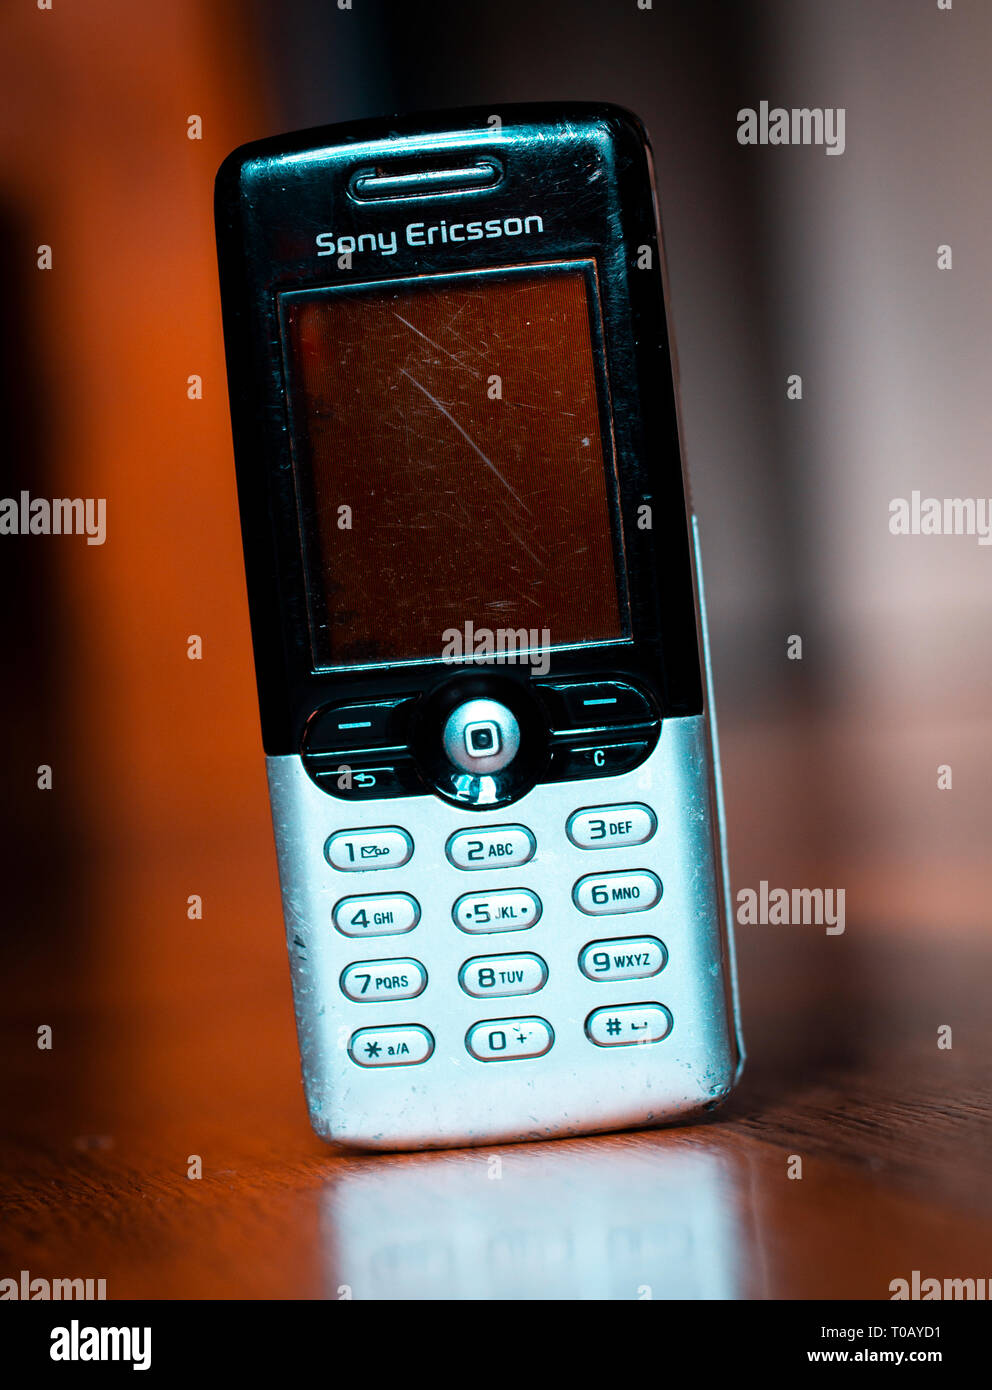 Sony Ericsson Mobile Cell Phone, Sony Mobile was founded ...